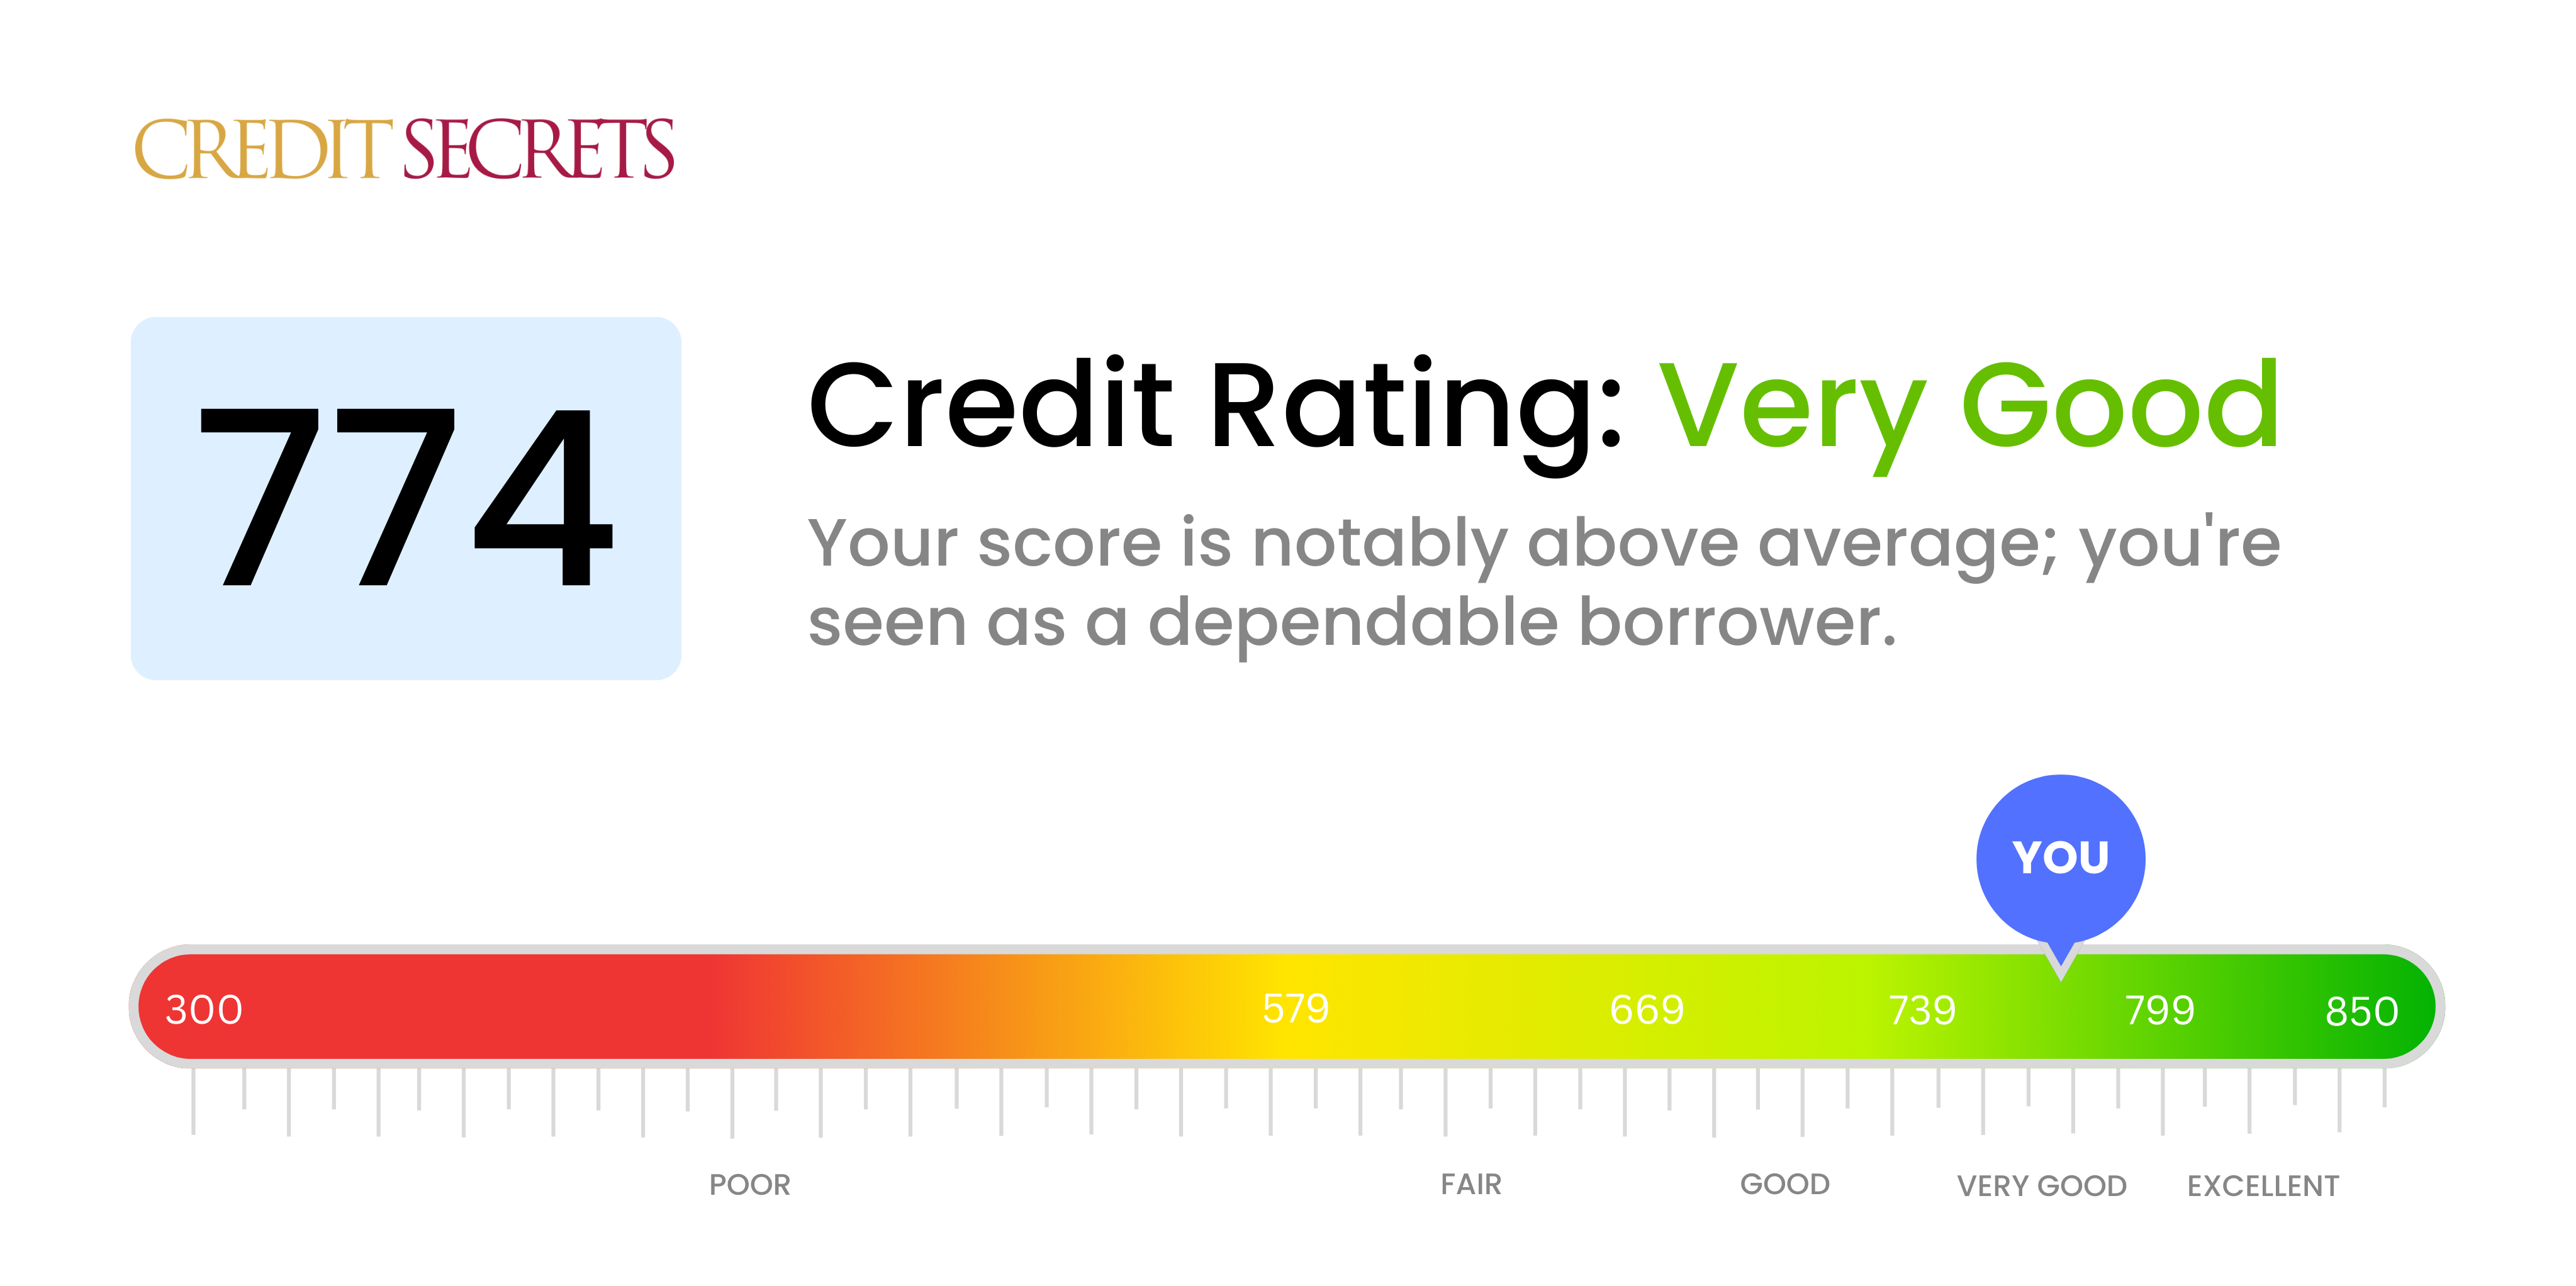 Is 774 a good credit score?